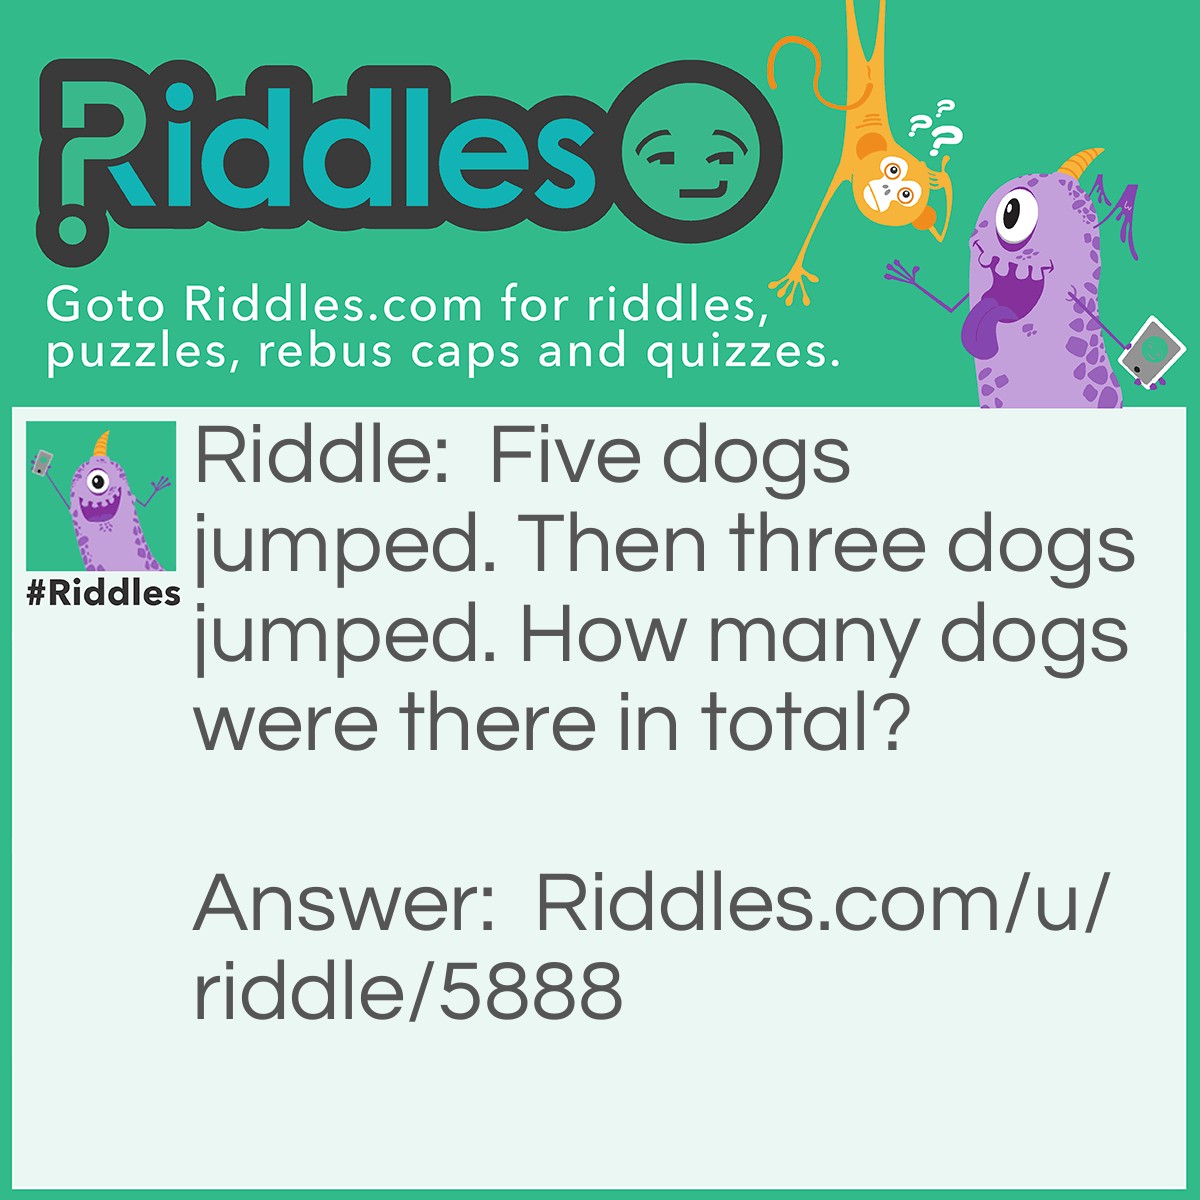 Riddle: Five dogs jumped. Then three dogs jumped. How many dogs were there in total? Answer: Five dogs. All five dogs jumped, then three dogs jumped.